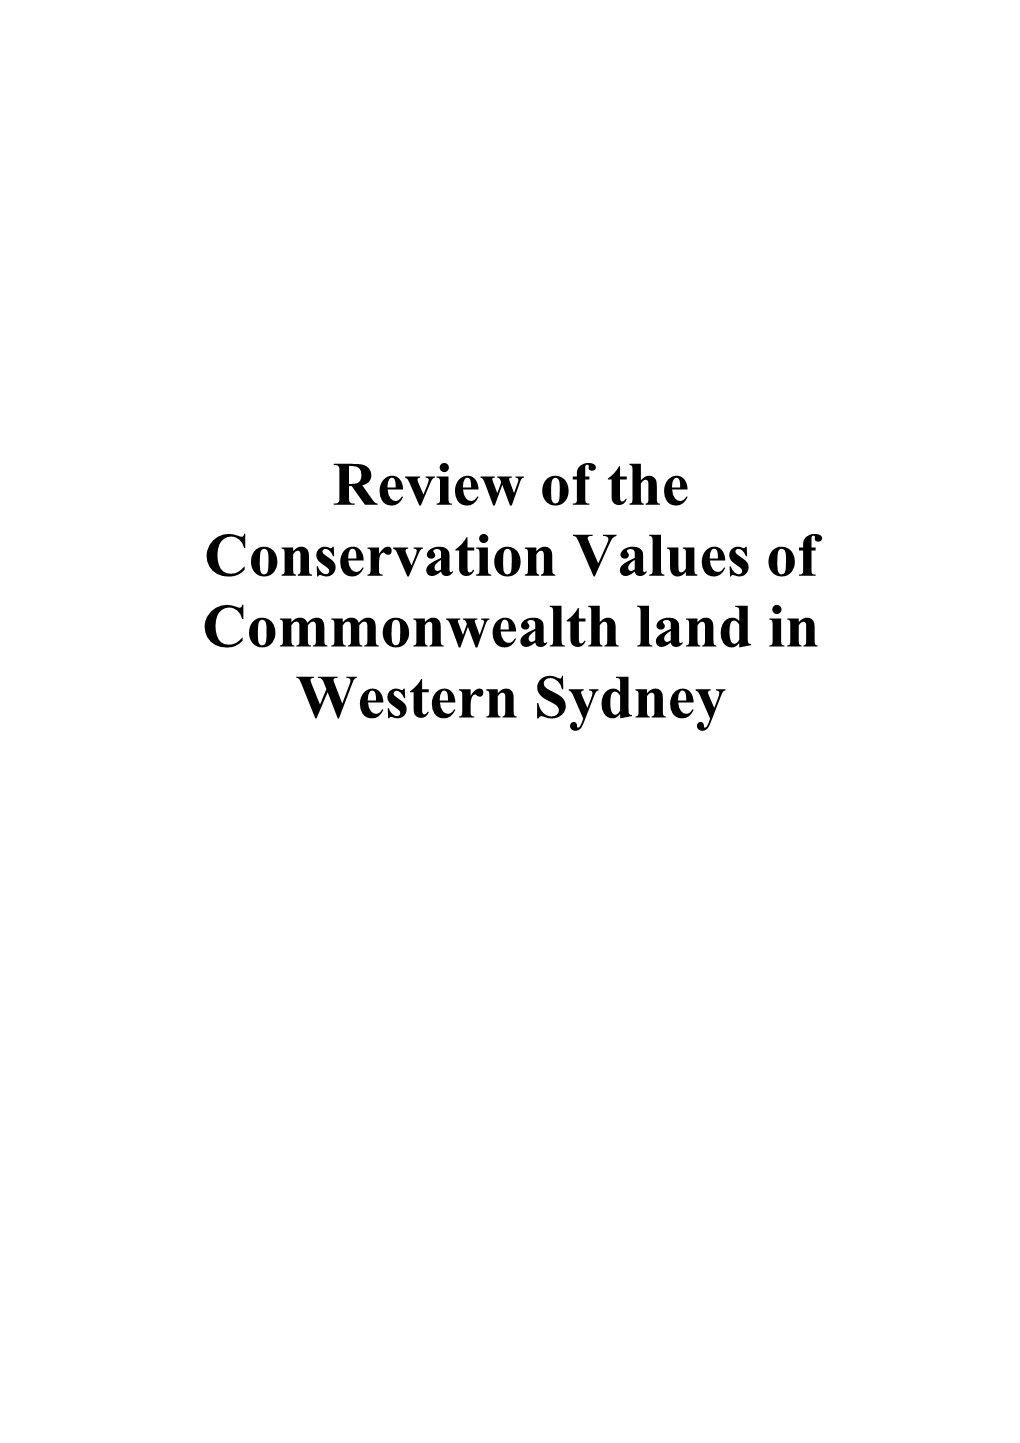 Review of the Conservation Values of Commonwealth Land in Western Sydney